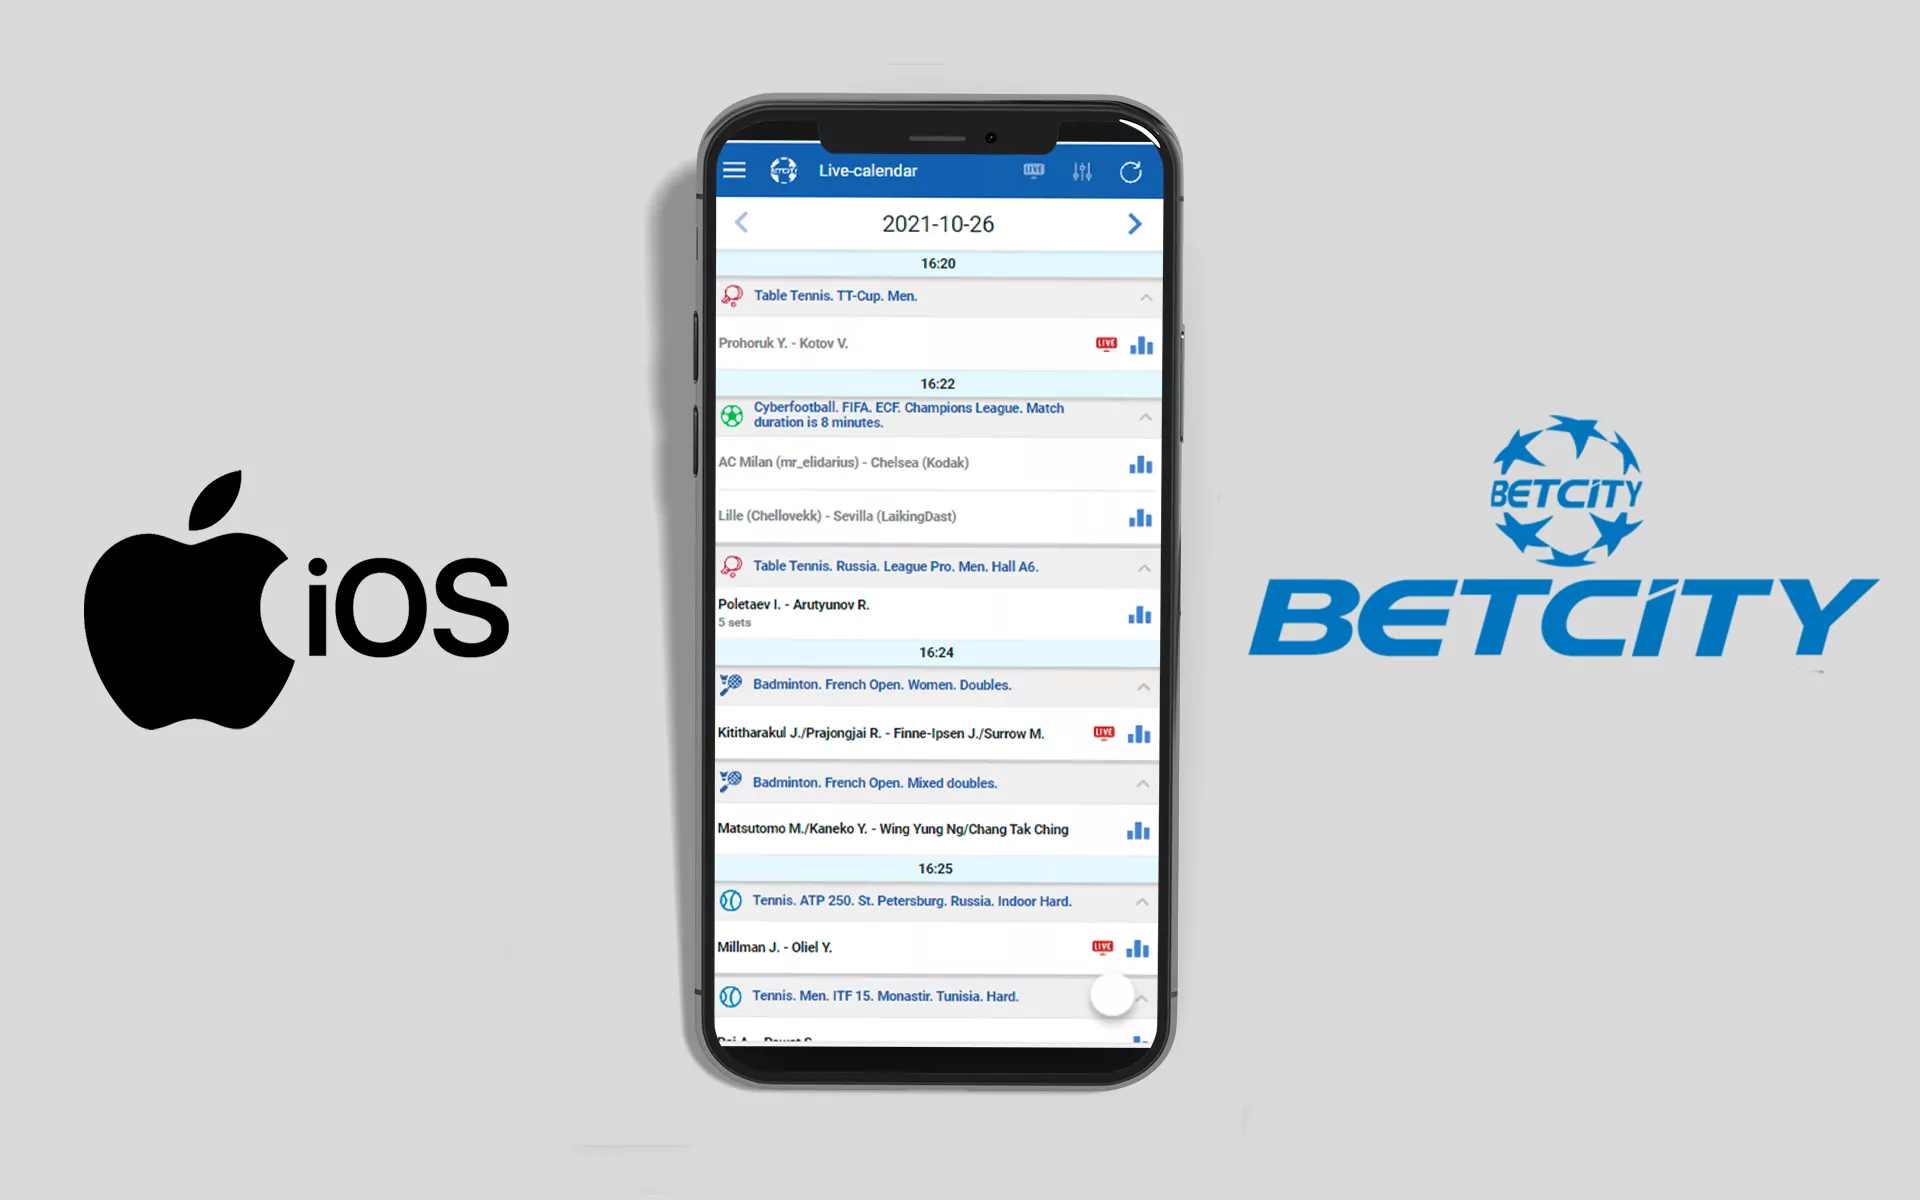 The owners of iPhones and iPads also can download the Betcity mobile app.